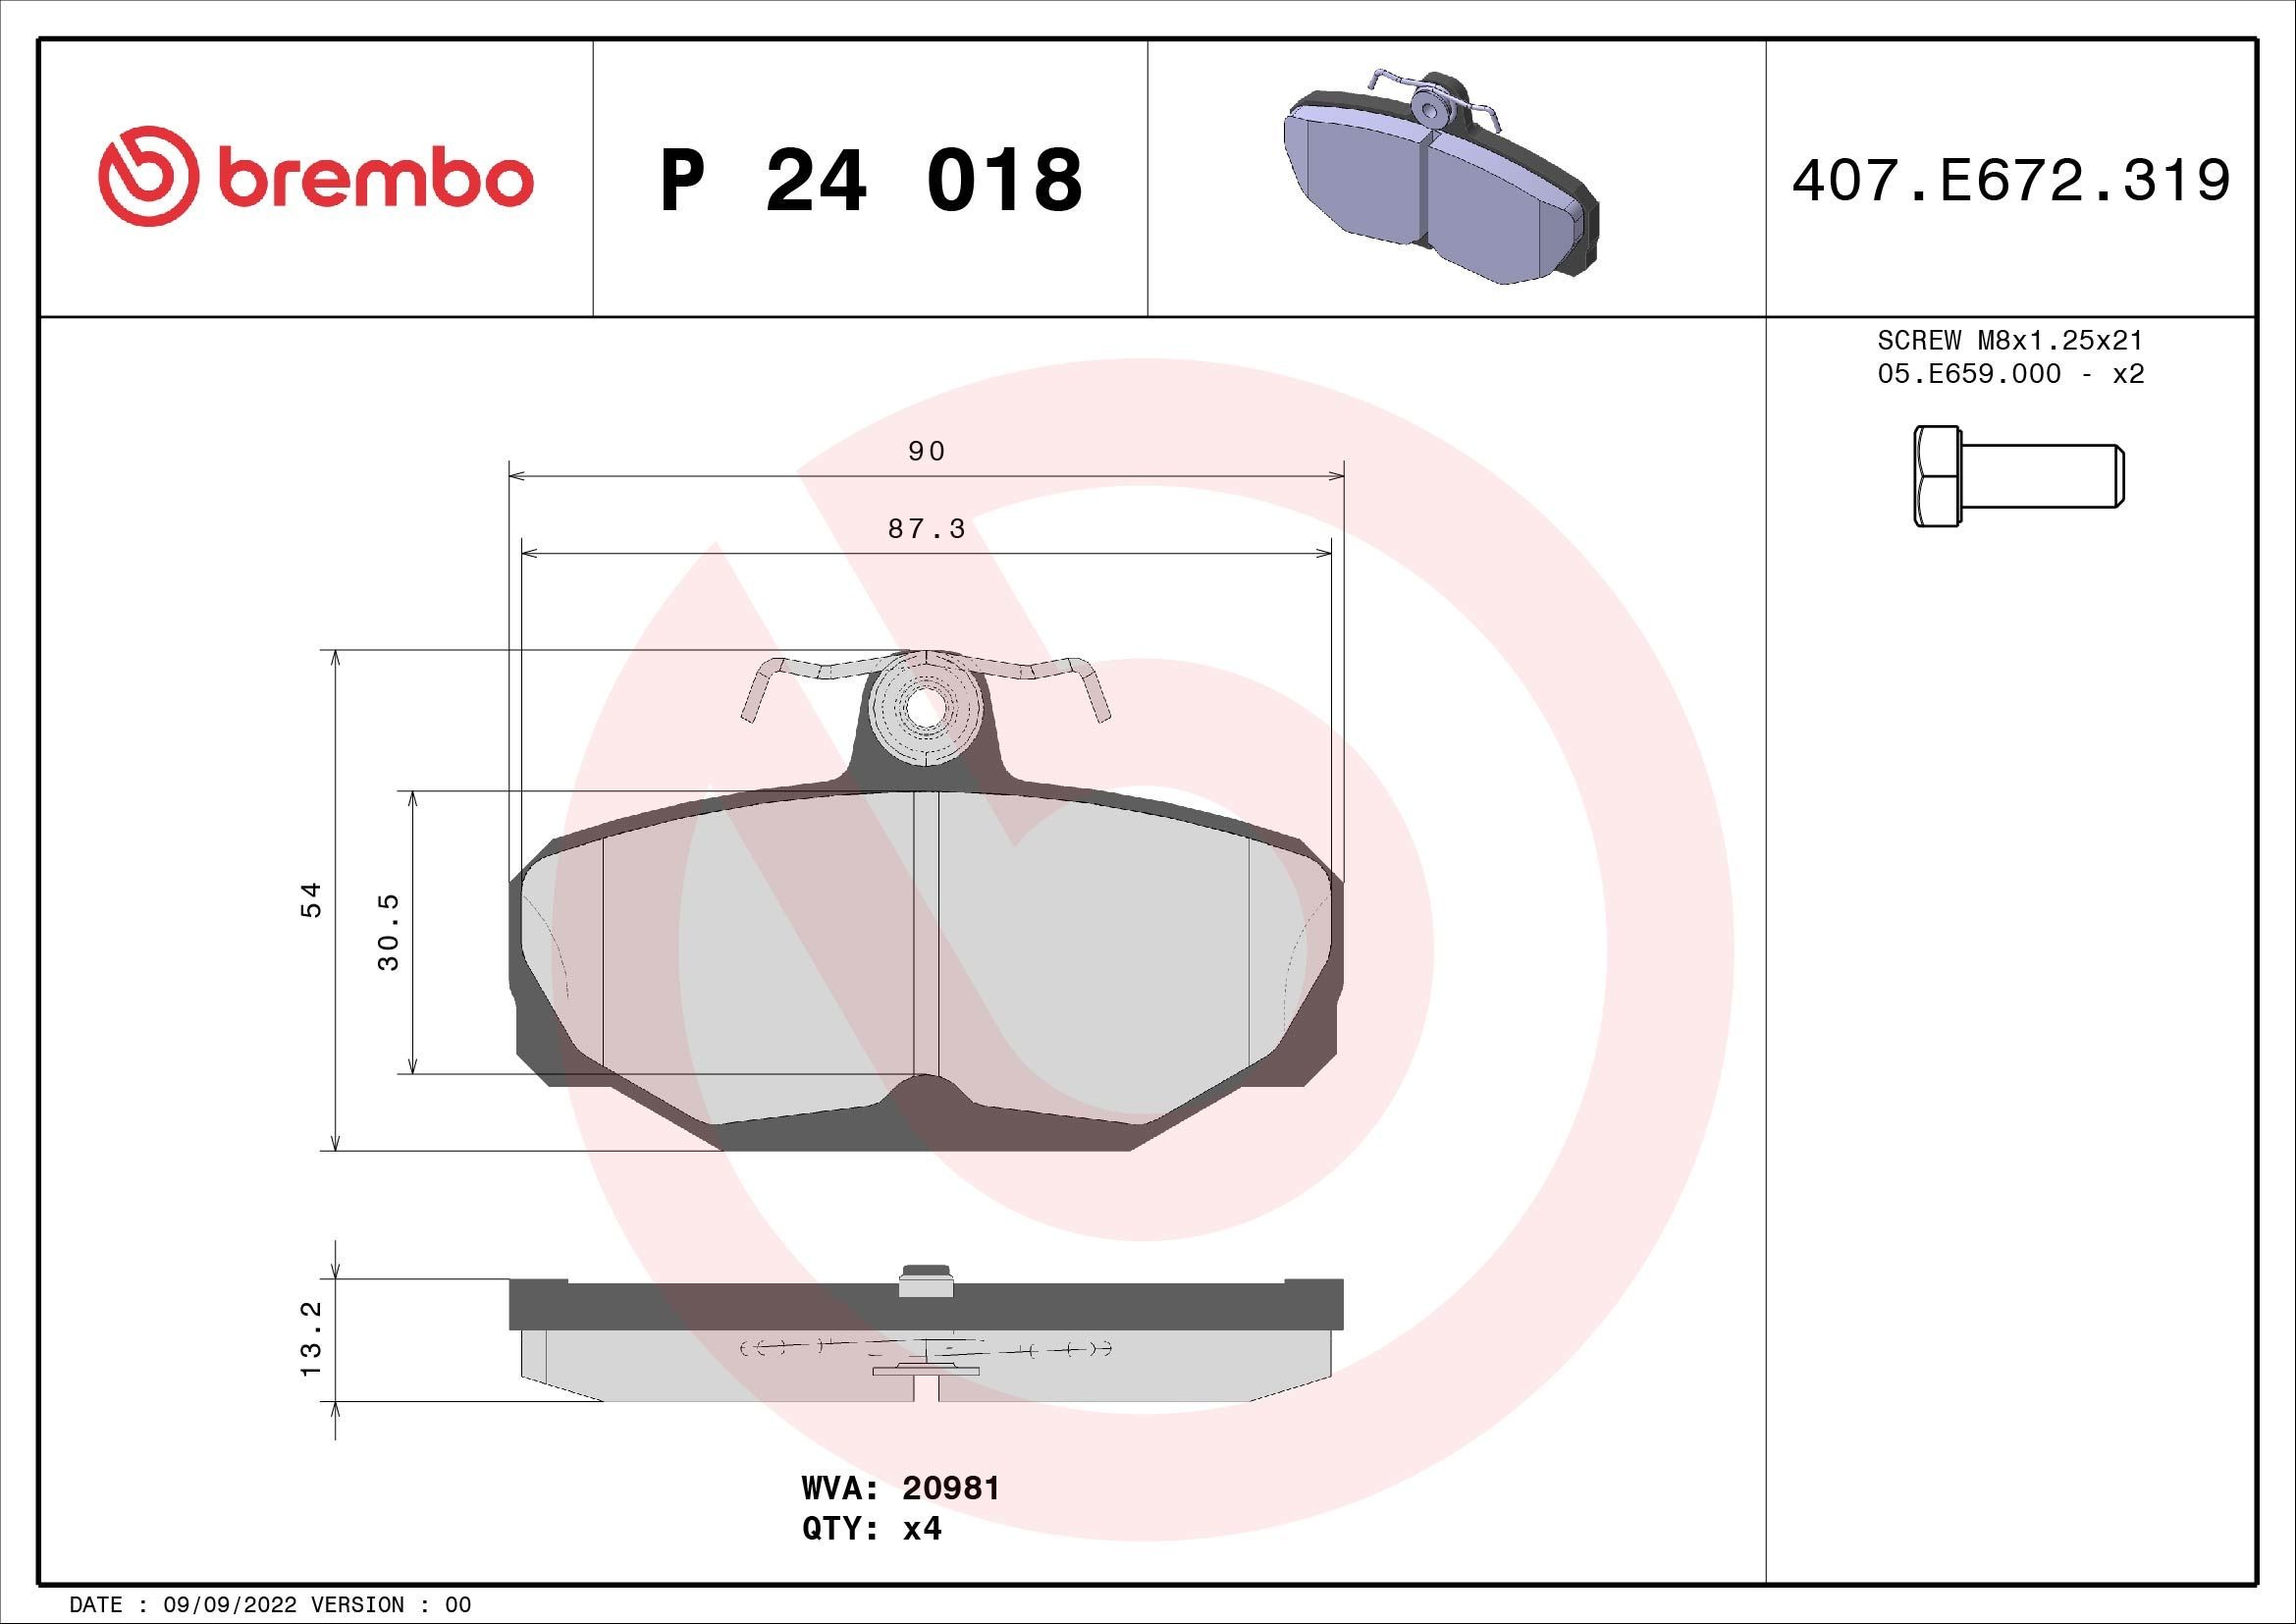 BREMBO P 24 018 Brake pad set excl. wear warning contact, with brake caliper screws, without accessories